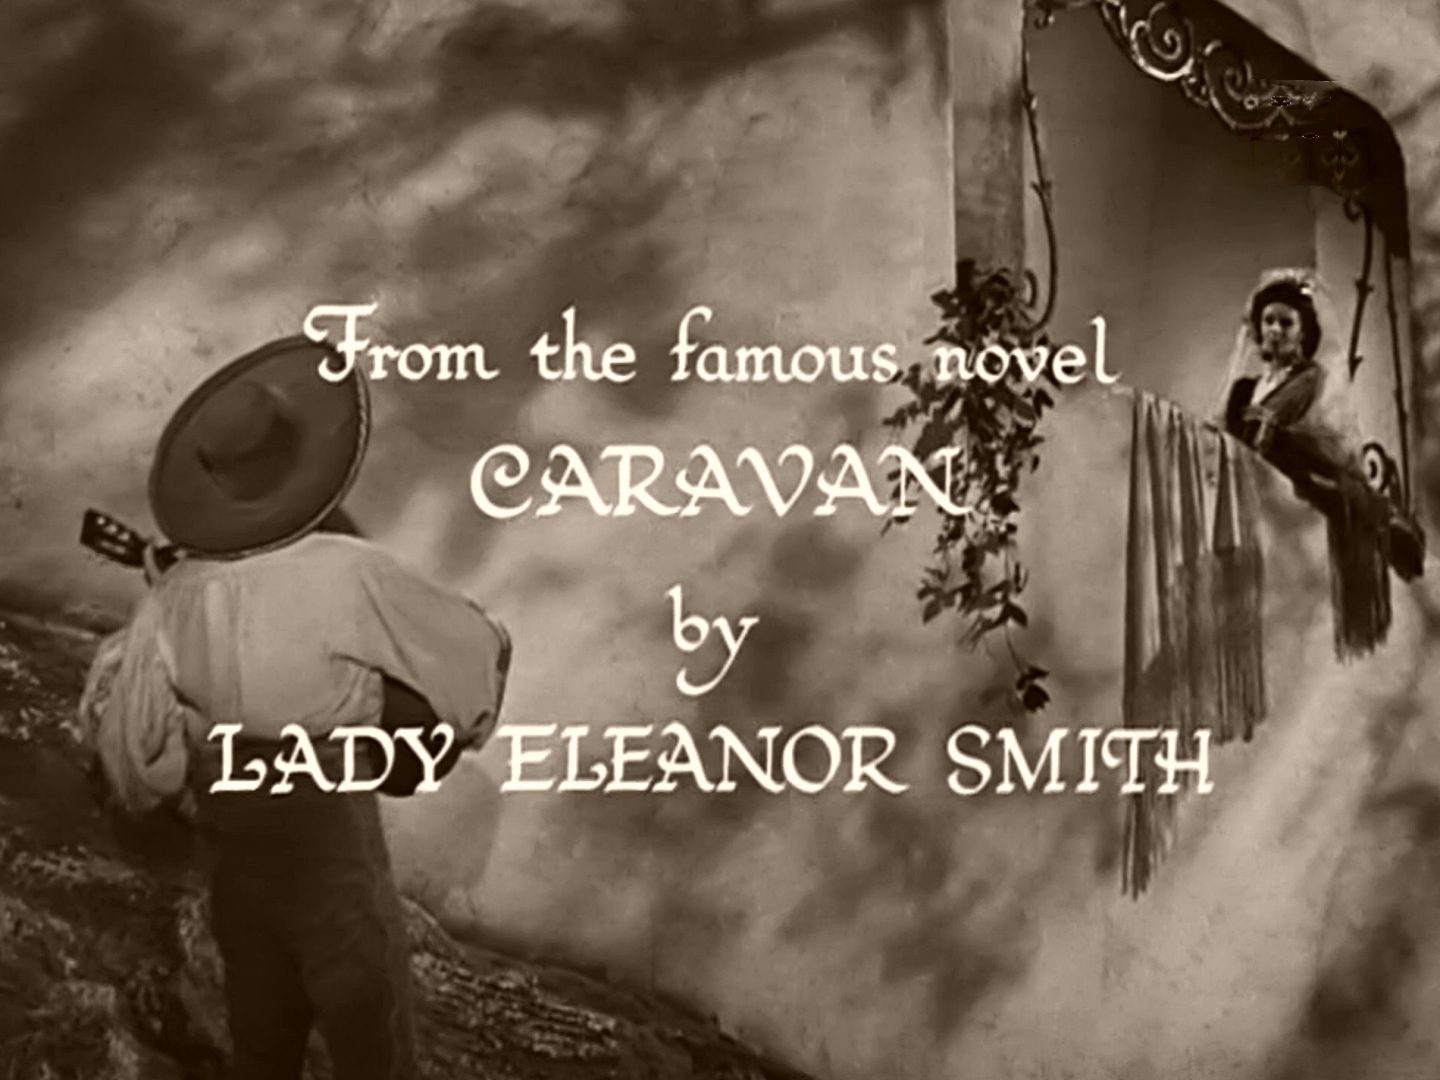 Main title from Caravan (1946) (5). From the famous novel ‘Caravan’ by Lady Eleanor Smith